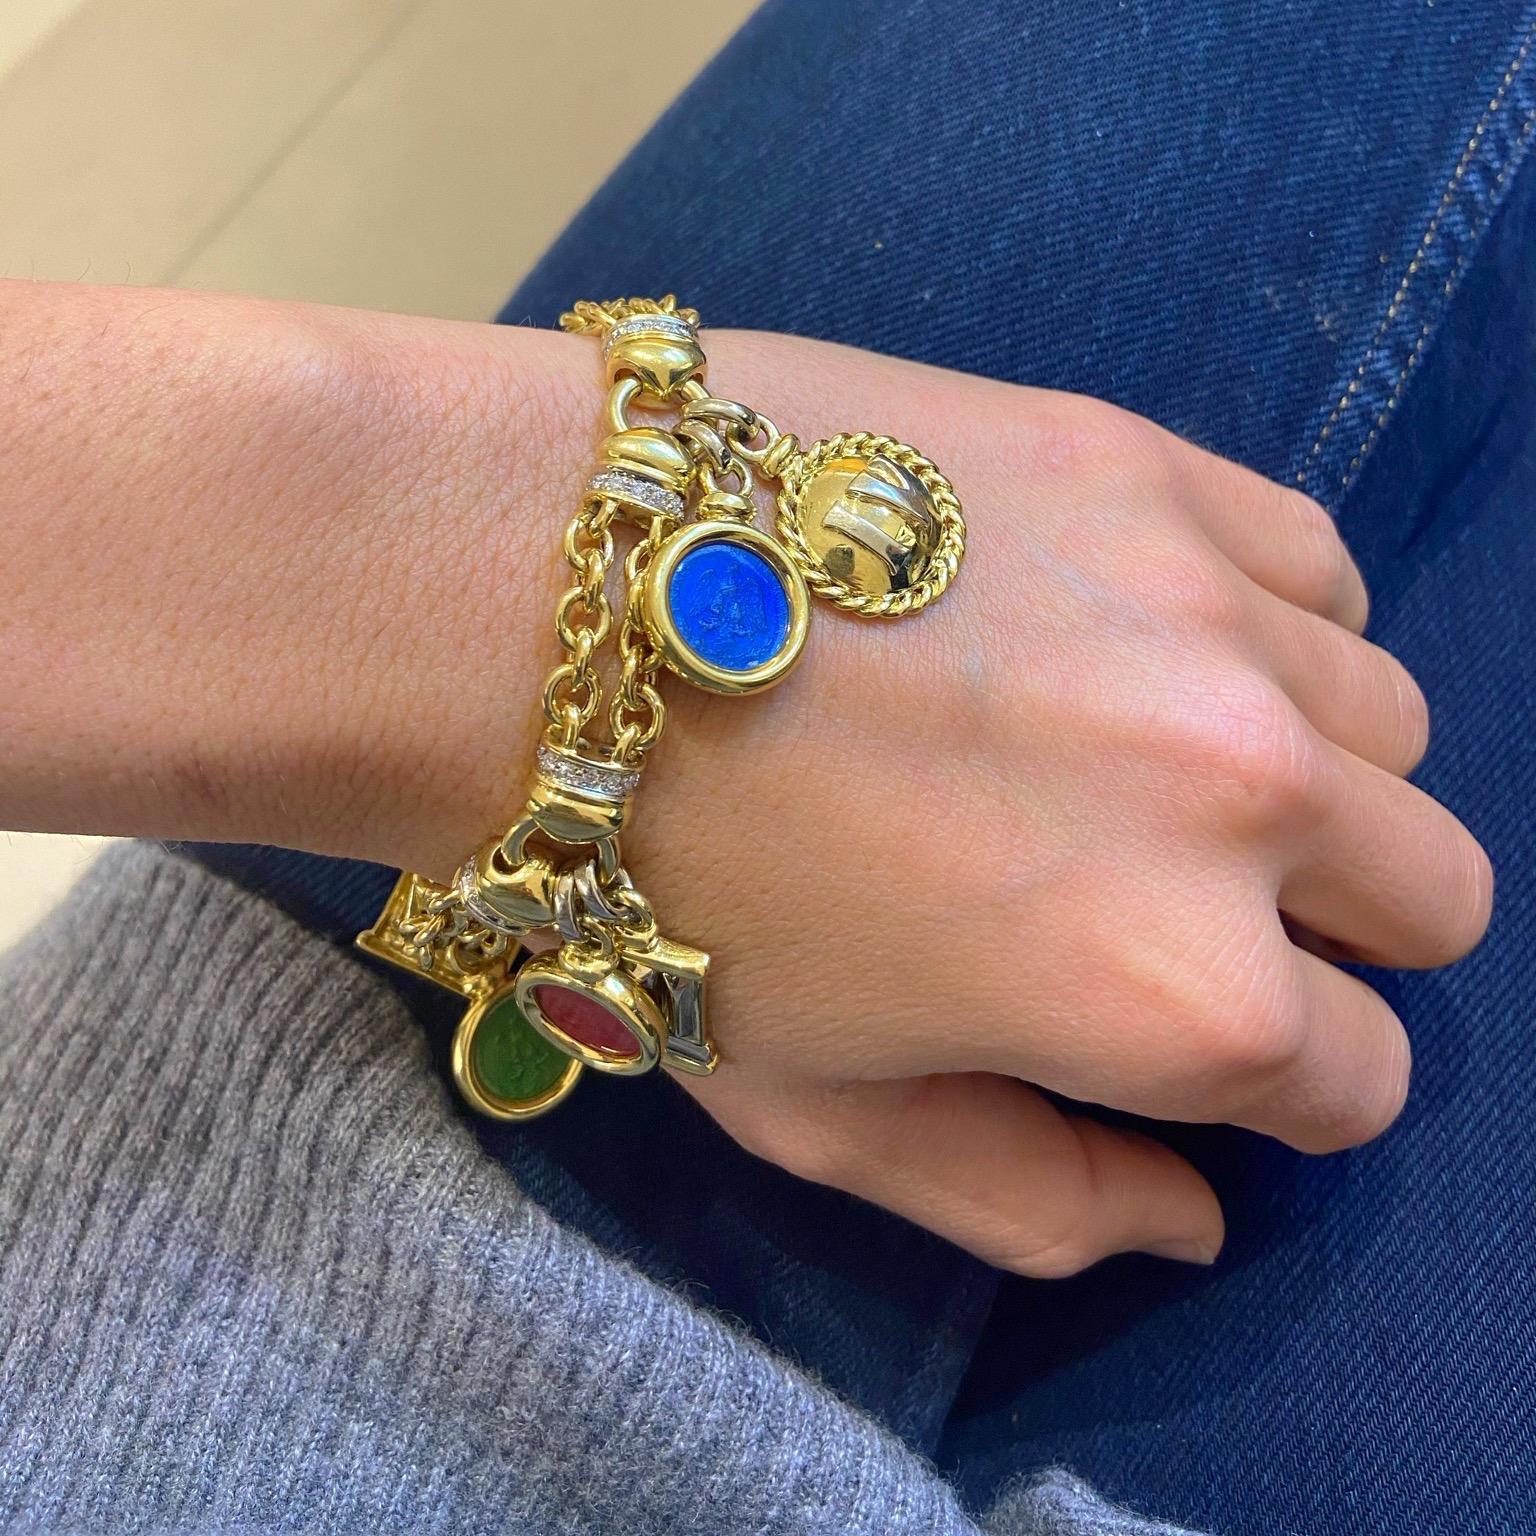 Timeless and classic charm bracelet. Designed with an 18 karat yellow gold and diamond link chain .The charms include 4 enameled peso's coin charms , along with important European and American hallmarks. The bracelet measures 7.25